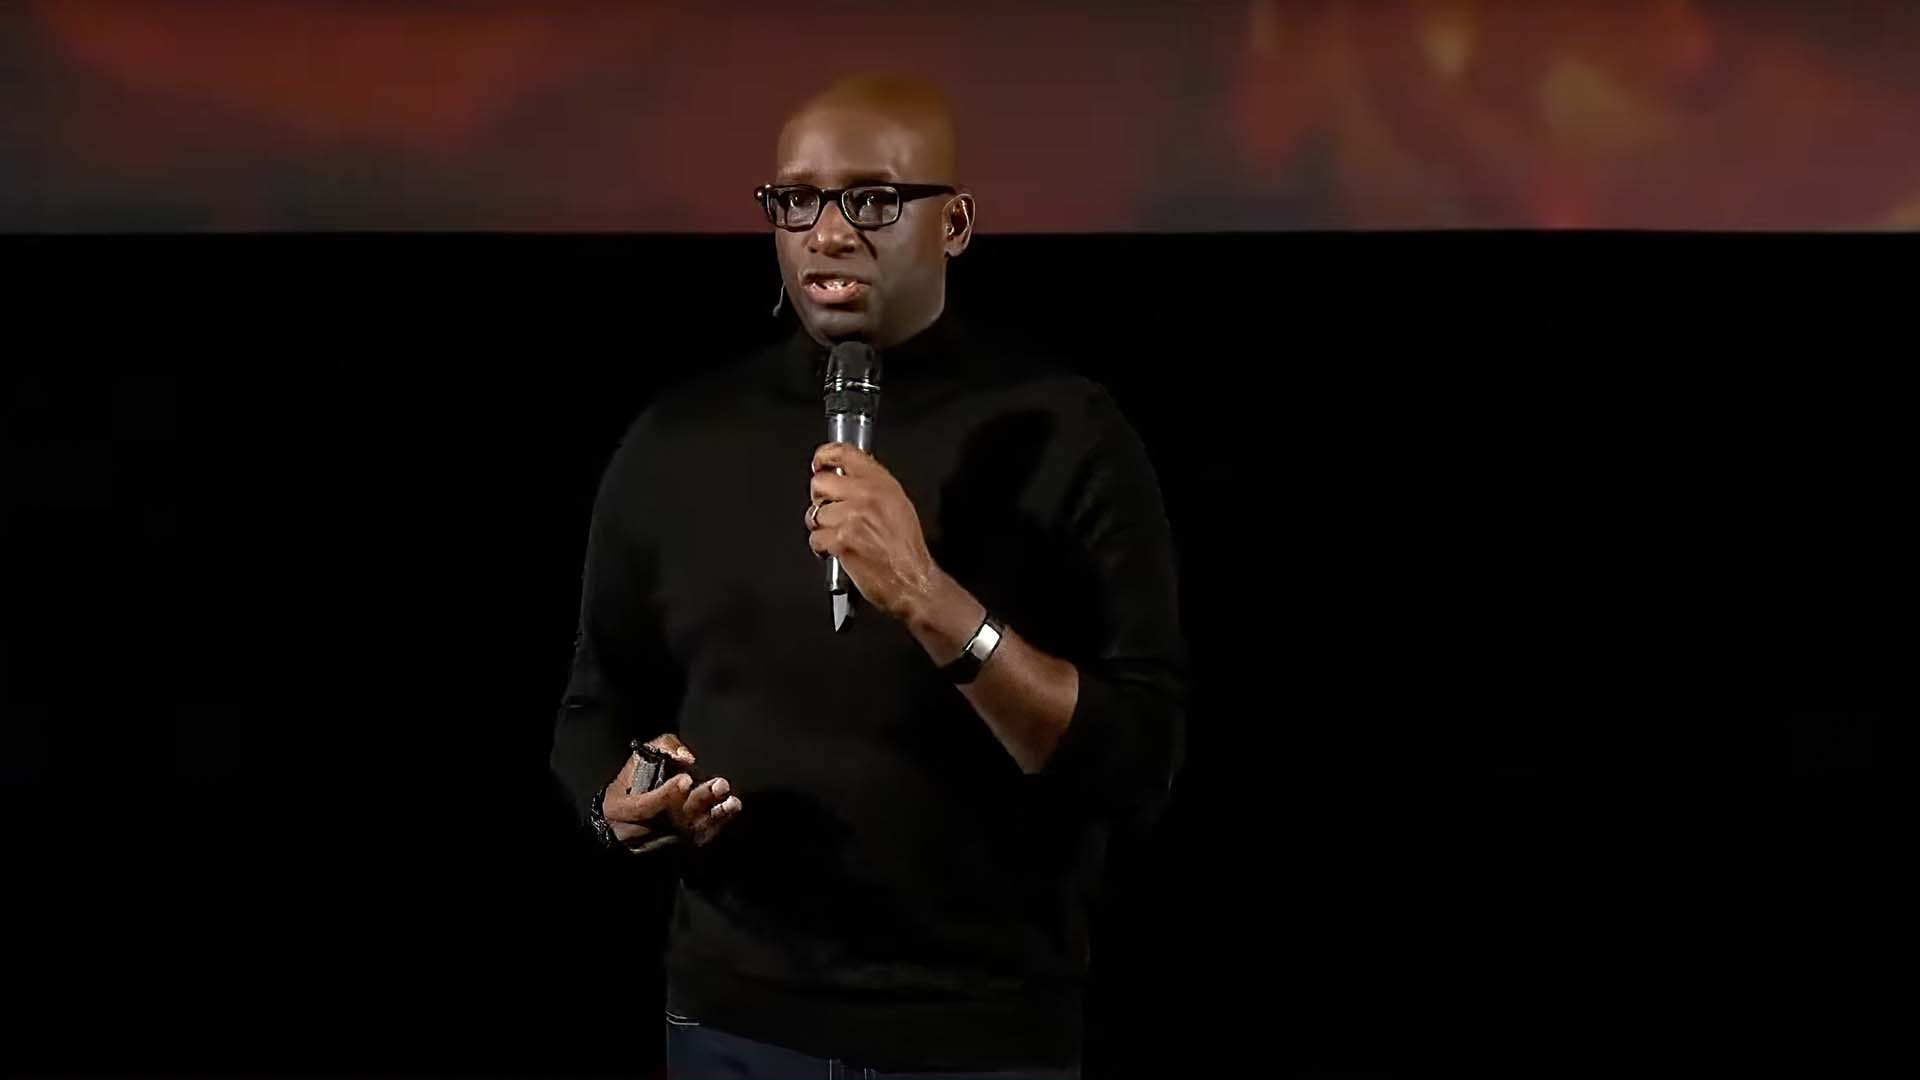 MoviePass 2.0 co-founder Stacy Spikes. Image: CNET/Youtube.